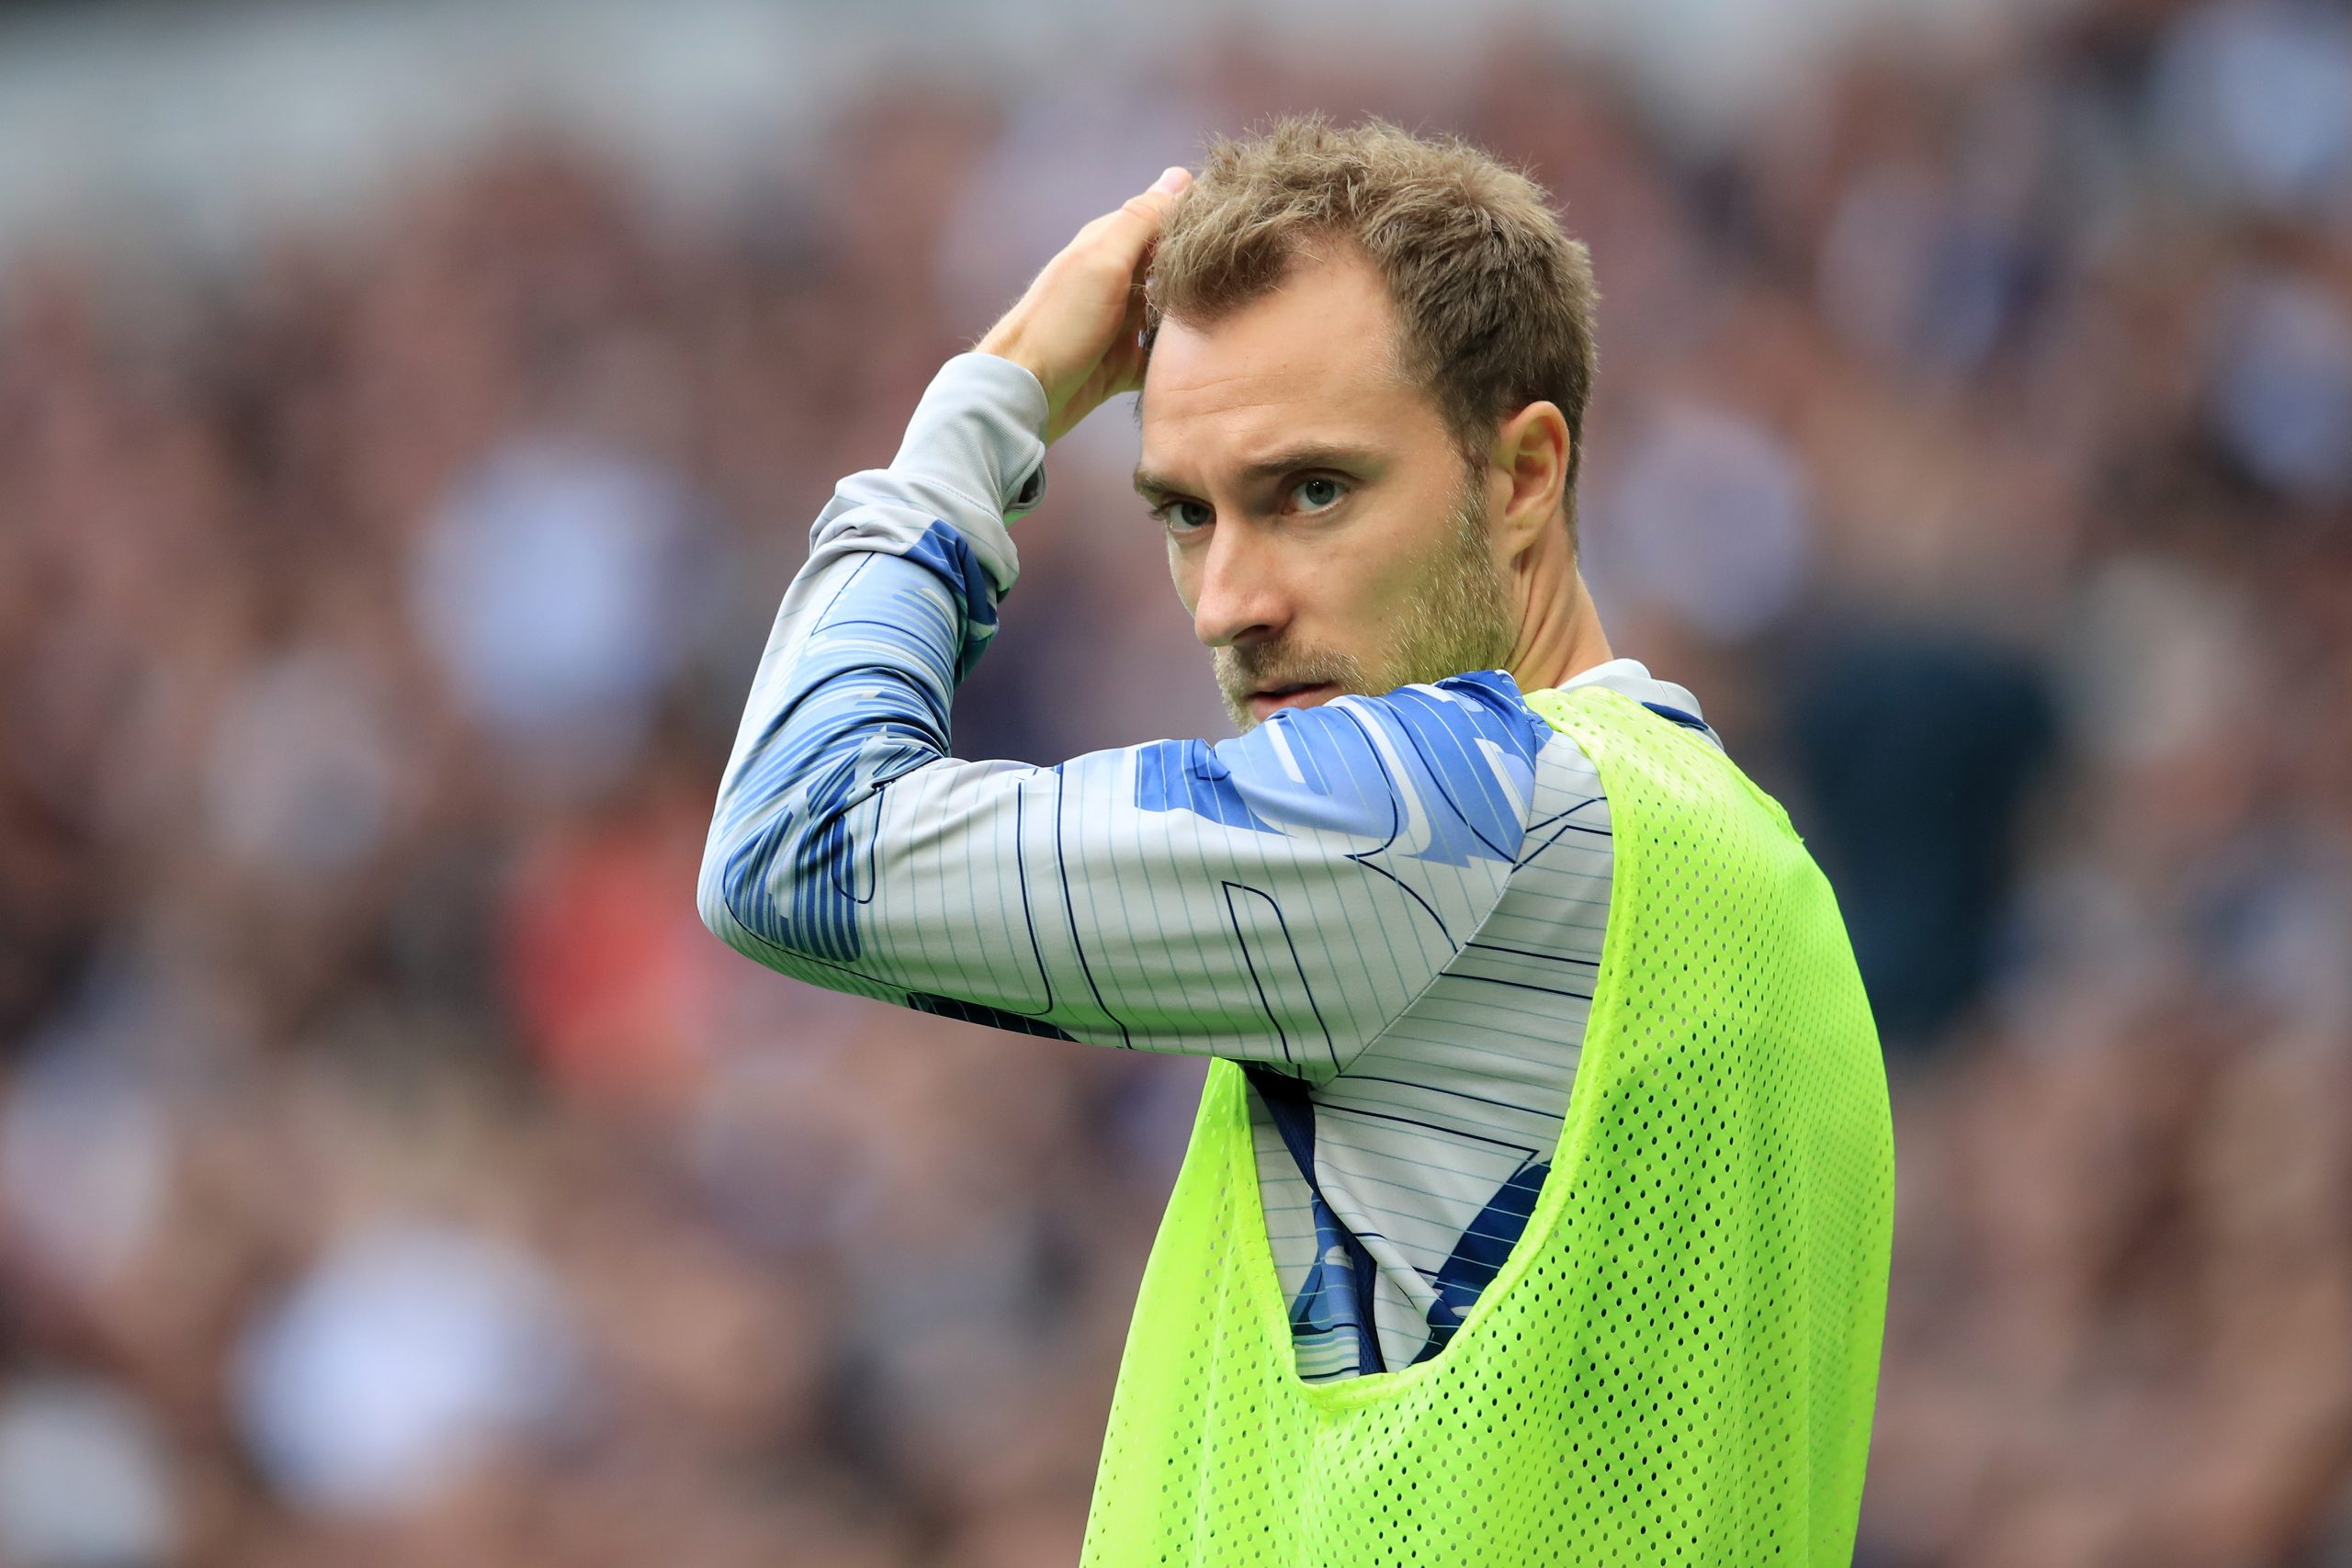 LONDON, ENGLAND - AUGUST 10: Christian Eriksen of Tottenham Hotspur looks on during the Premier League match between Tottenham Hotspur and Aston Villa at Tottenham Hotspur Stadium on August 10, 2019 in London, United Kingdom. (Photo by Marc Atkins/Getty Images)